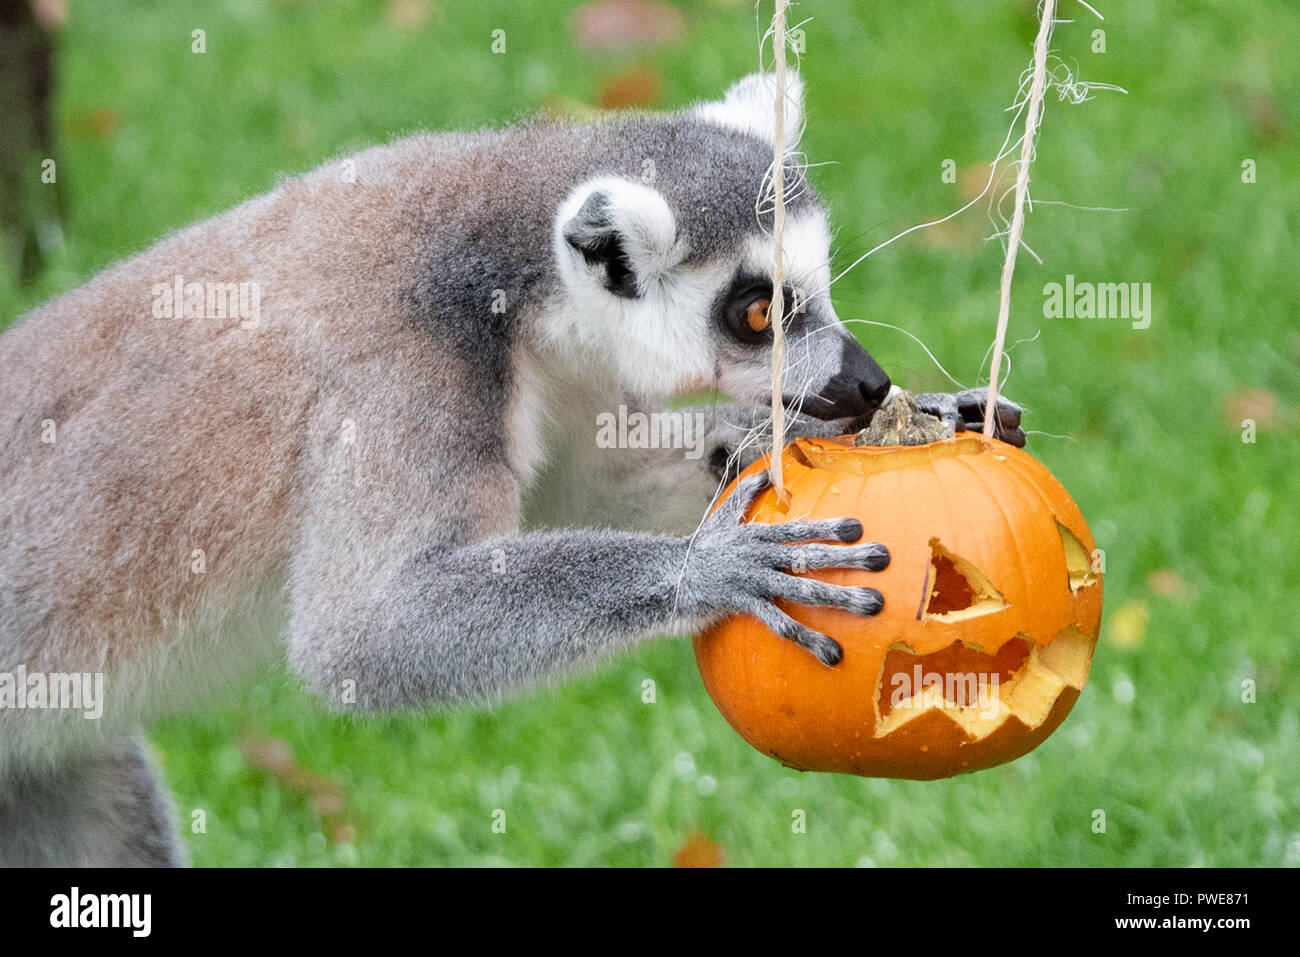 Whipsnade, United Kingdom. 16 October 2018. Keepers at ZSL Whipsnade Zoo carved huge pumpkins for each of the Zoo’s three endangered Amur tiger cubs, Dmitri, Makari and Czar. The Zoo’s spirited group of ring-tailed lemurs, so named after the ghosts of Roman mythology (lemures), also got in on the action. Keepers prepared a series of small pumpkins, filled with raisins and other tasty treats. Credit: Peter Manning/Alamy Live News Stock Photo